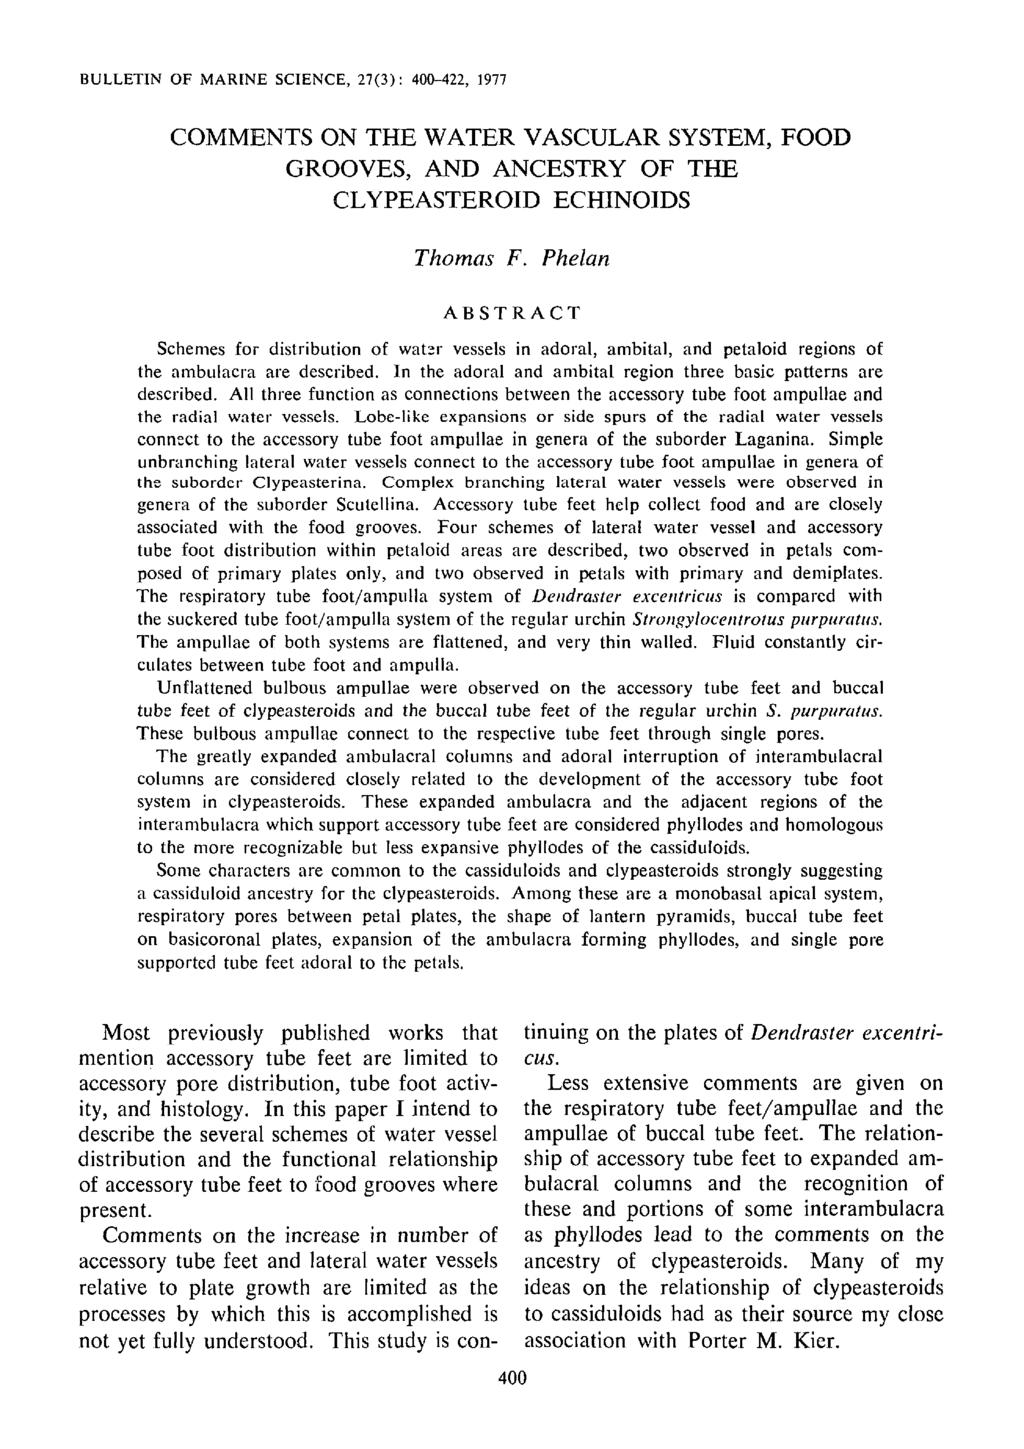 BULLETN OF MARNE SCENCE, 27(3): 400-422, 1977 COMMENTS ON THE WATER VASCULAR SYSTEM, FOOD GROOVES, AND ANCESTRY OF THE CLYPEASTEROD ECHNODS Thomas F.